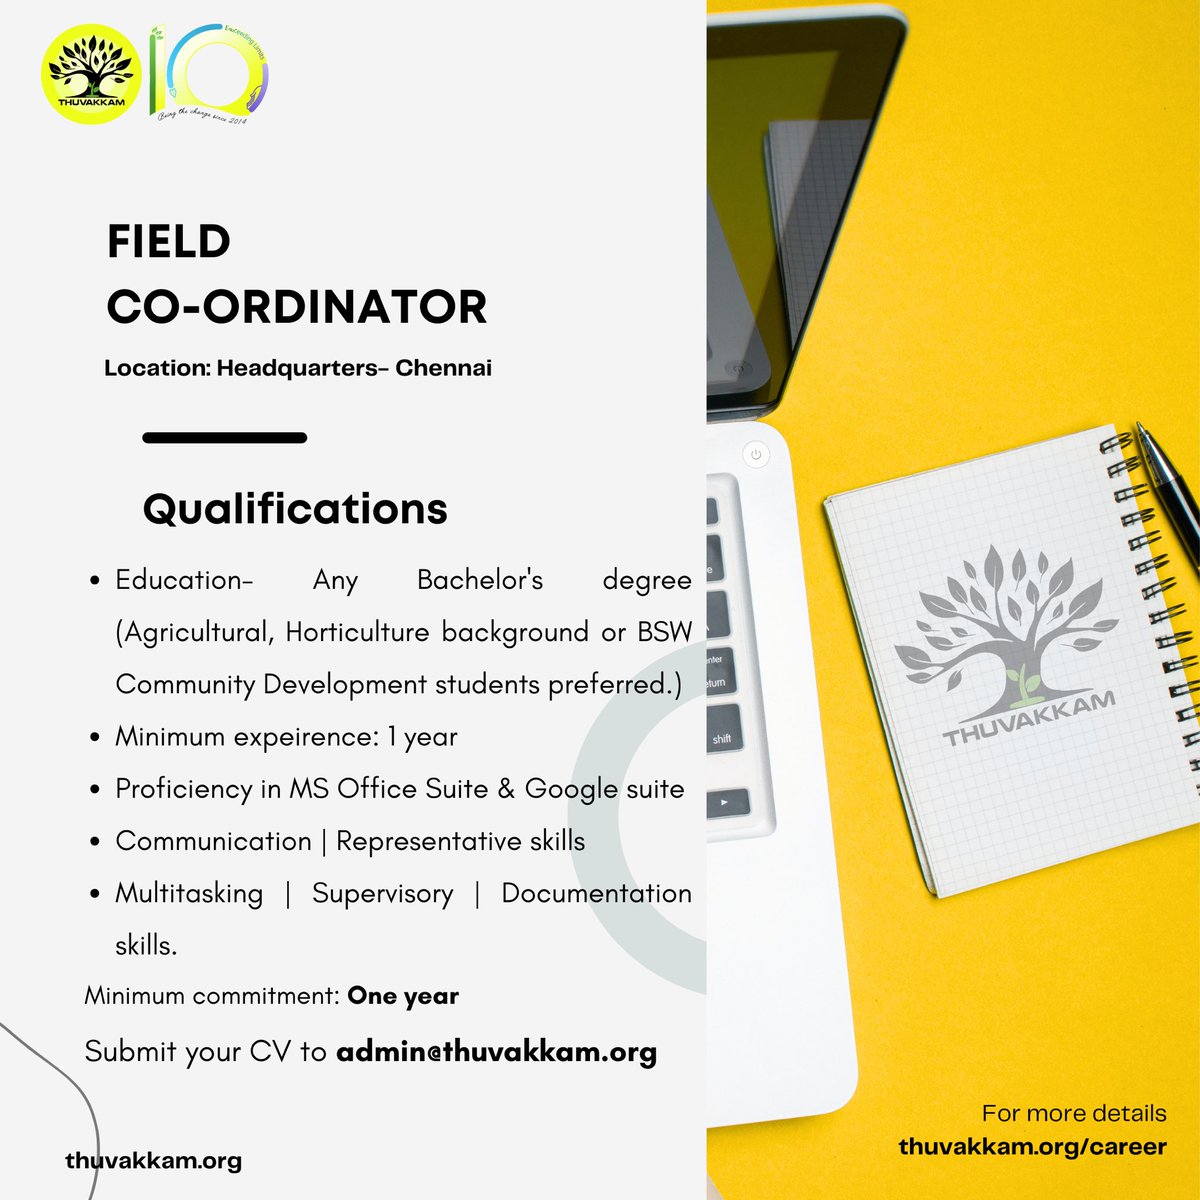 Job vacancy in Thuvakkam. We require a Field Coordinator to join our team immediately. Mail us your resume at mailto:admin@thuvakkam.org

Comment in the post if you are interested!

#jobvacancy #recruitment #thuvakkam #hiringpost #hiring #fieldcoordinator #fc #sitecoordinator